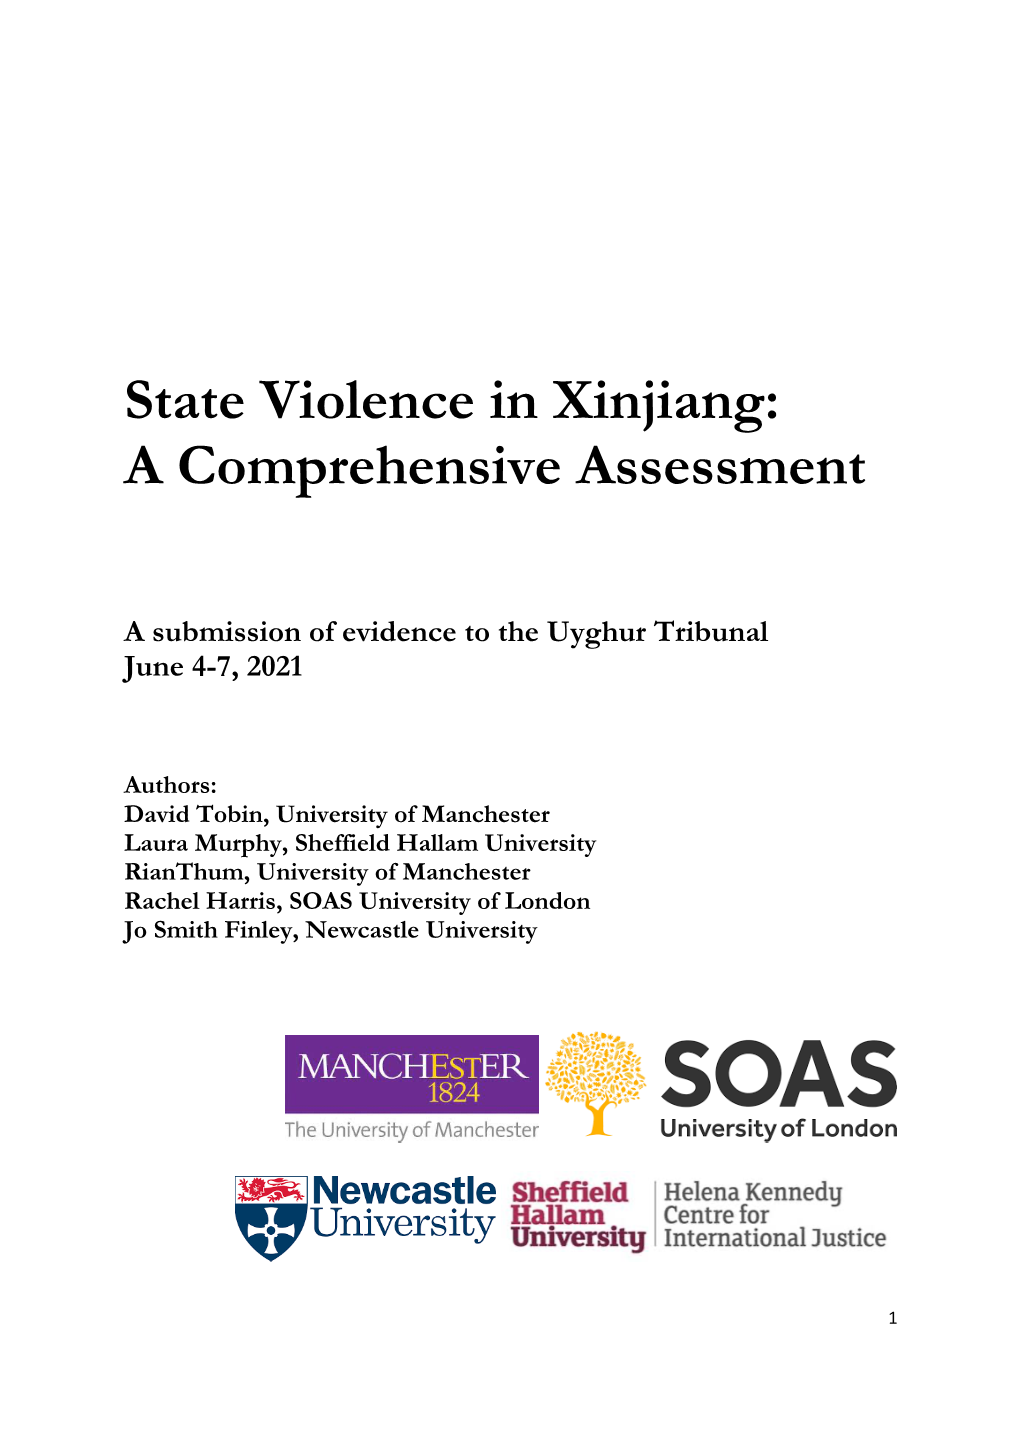 State Violence in Xinjiang: a Comprehensive Assessment